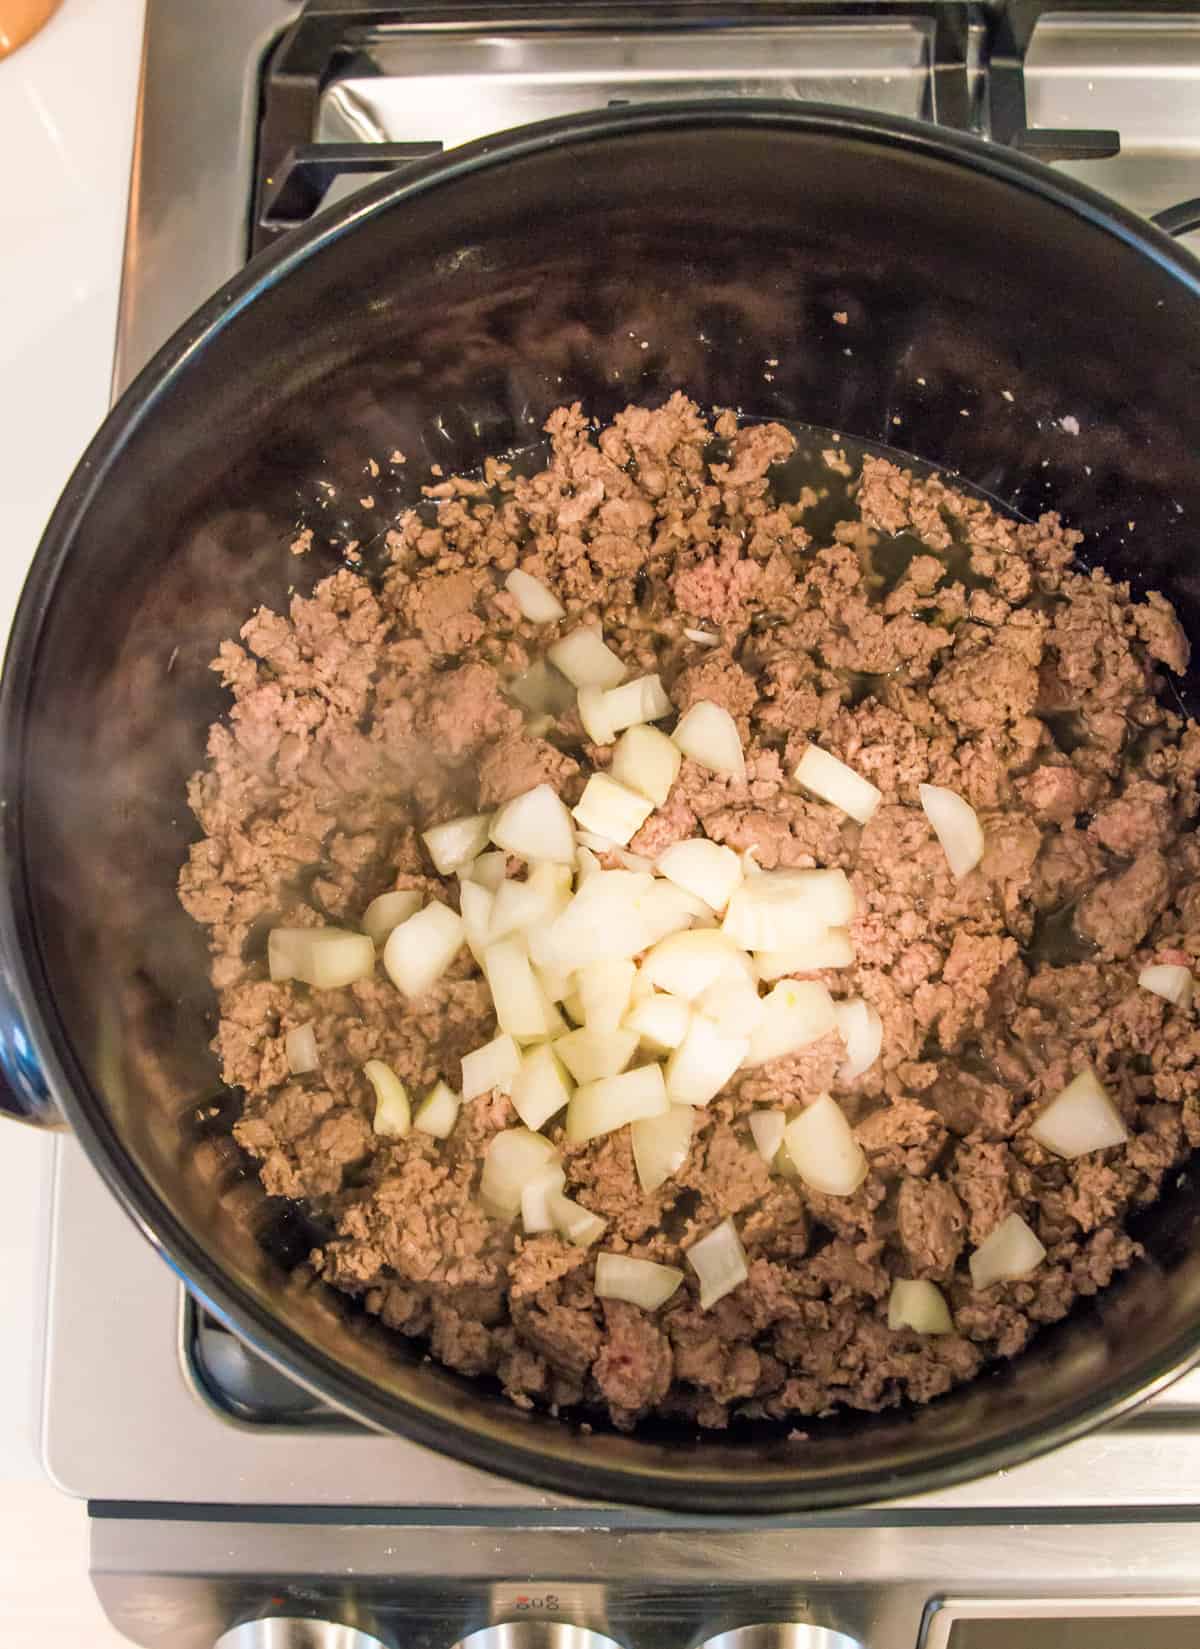 A pot on the stovetop with cooked ground pork and chopped white onion in it.